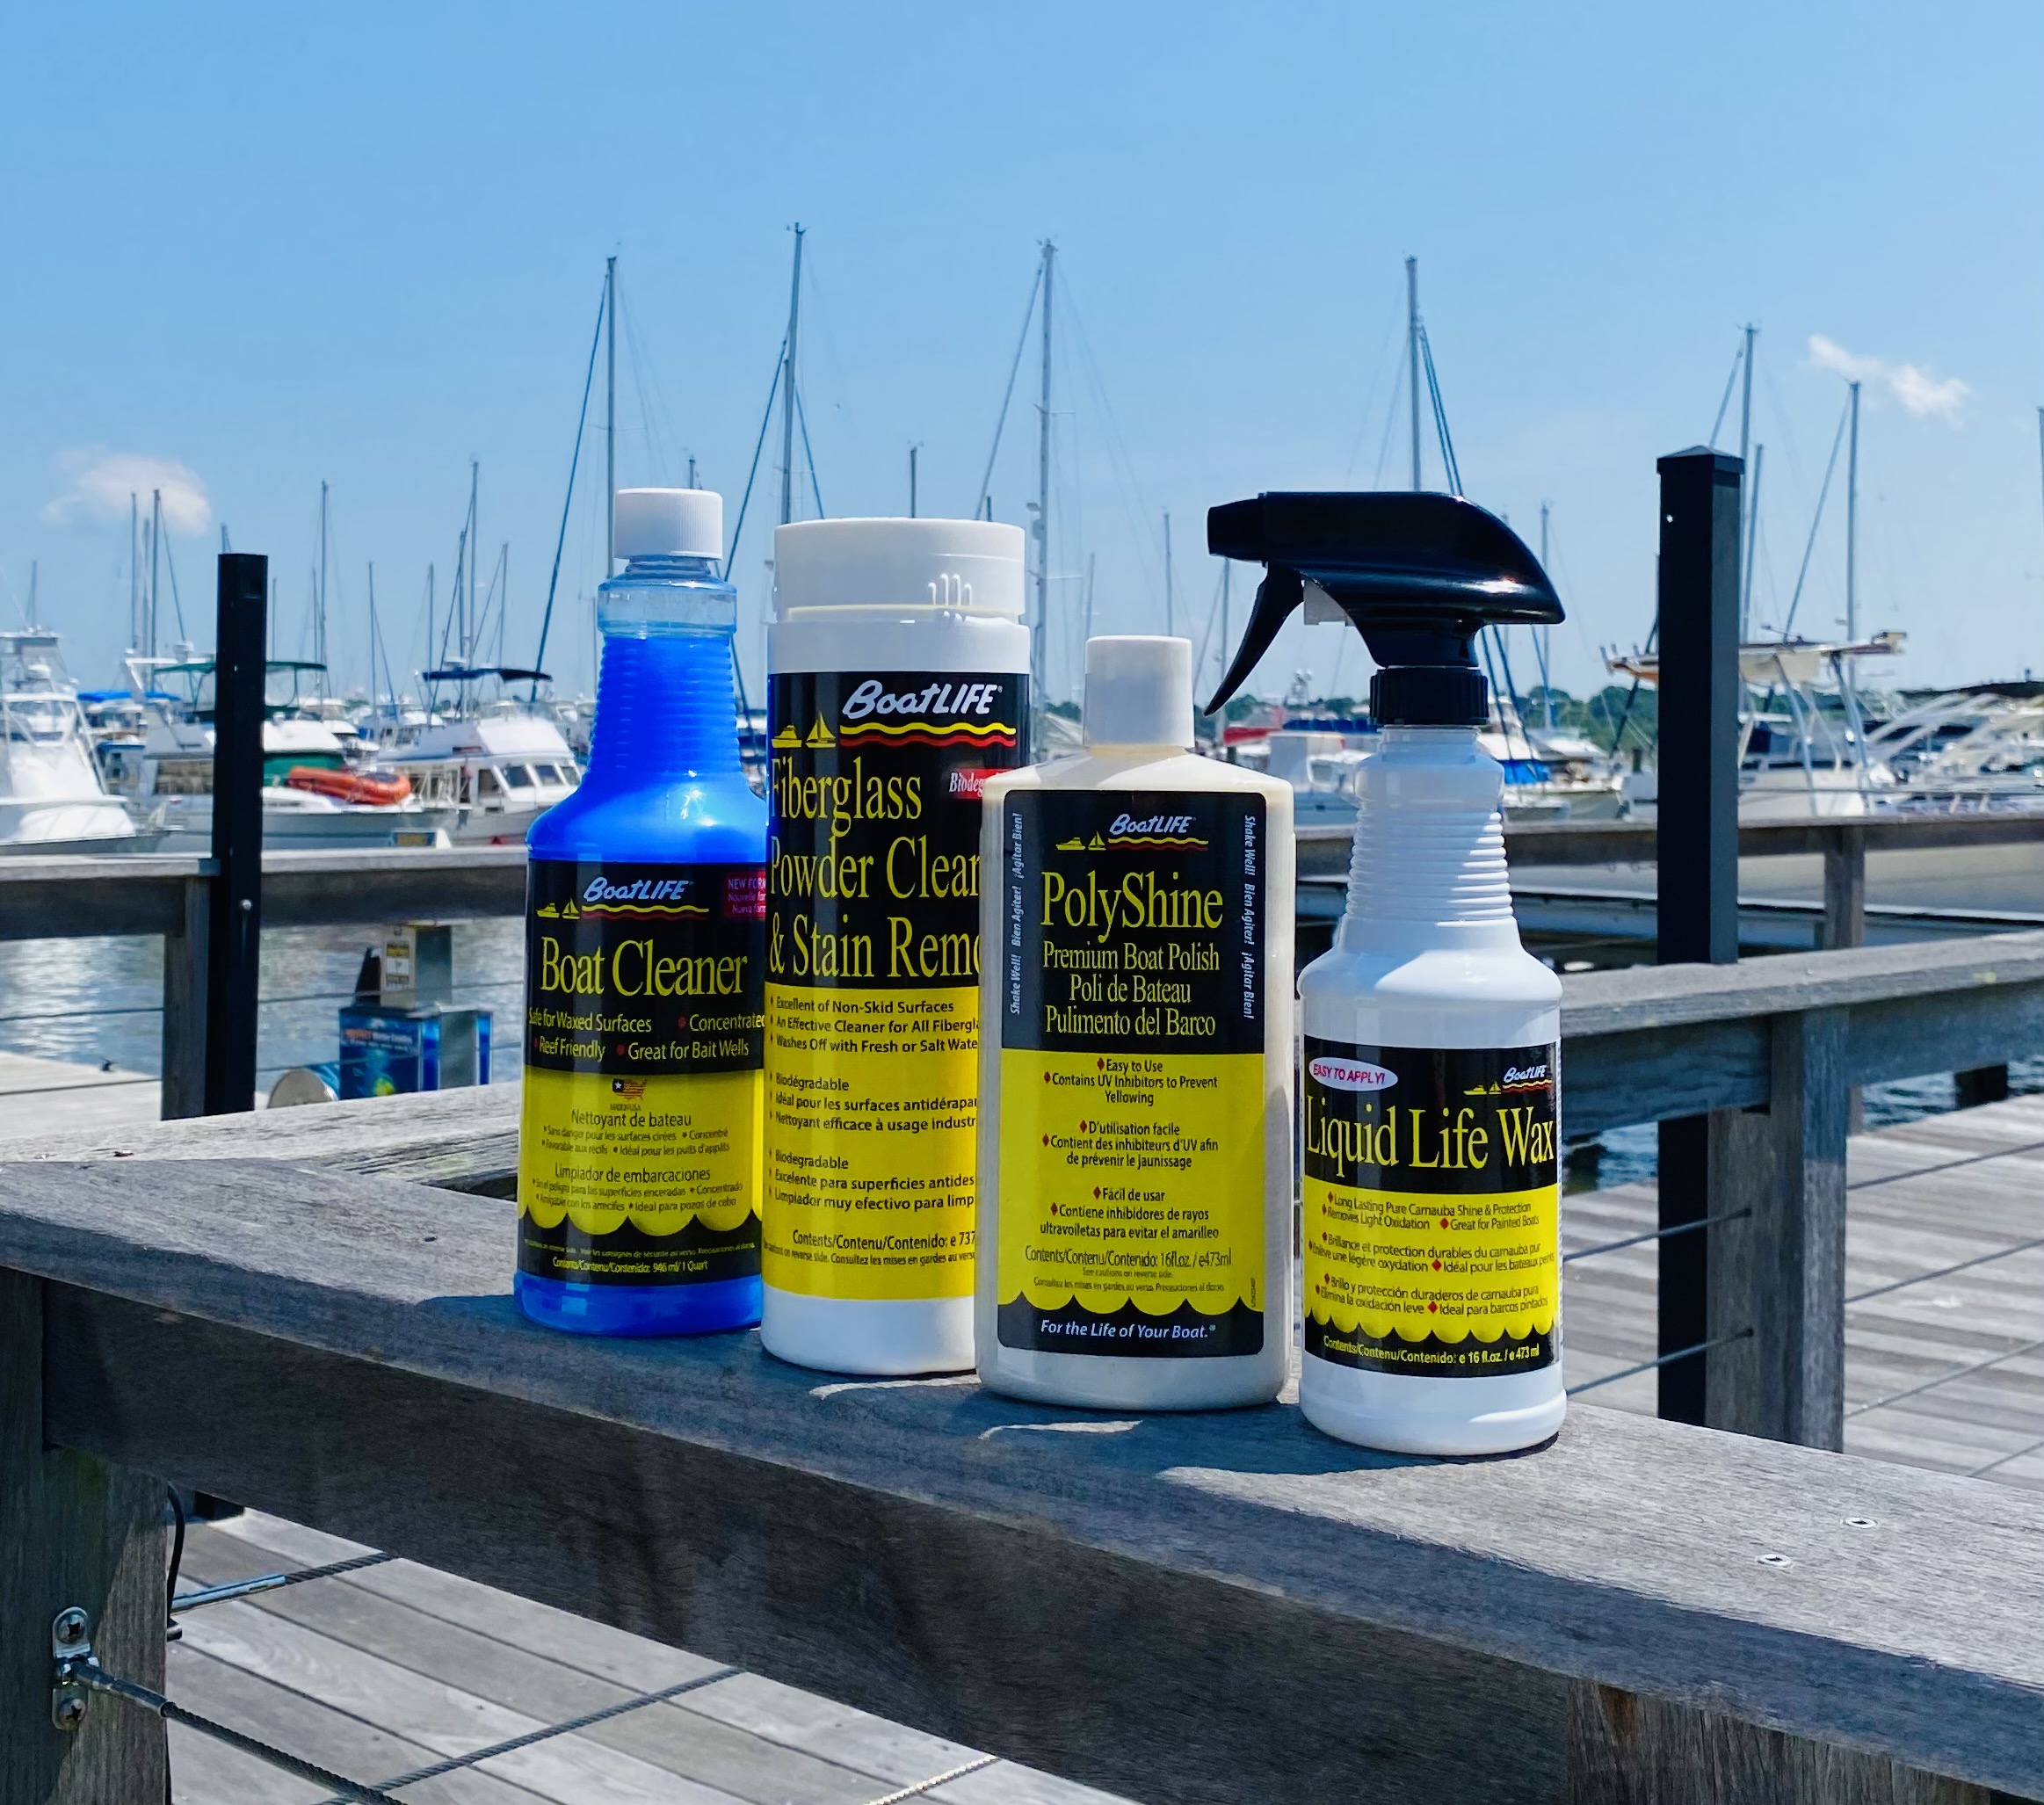 Boat Cleaner, Fiberglass Powder Clean and Stain Remover, PolyShine and Liquid Life Wax photo